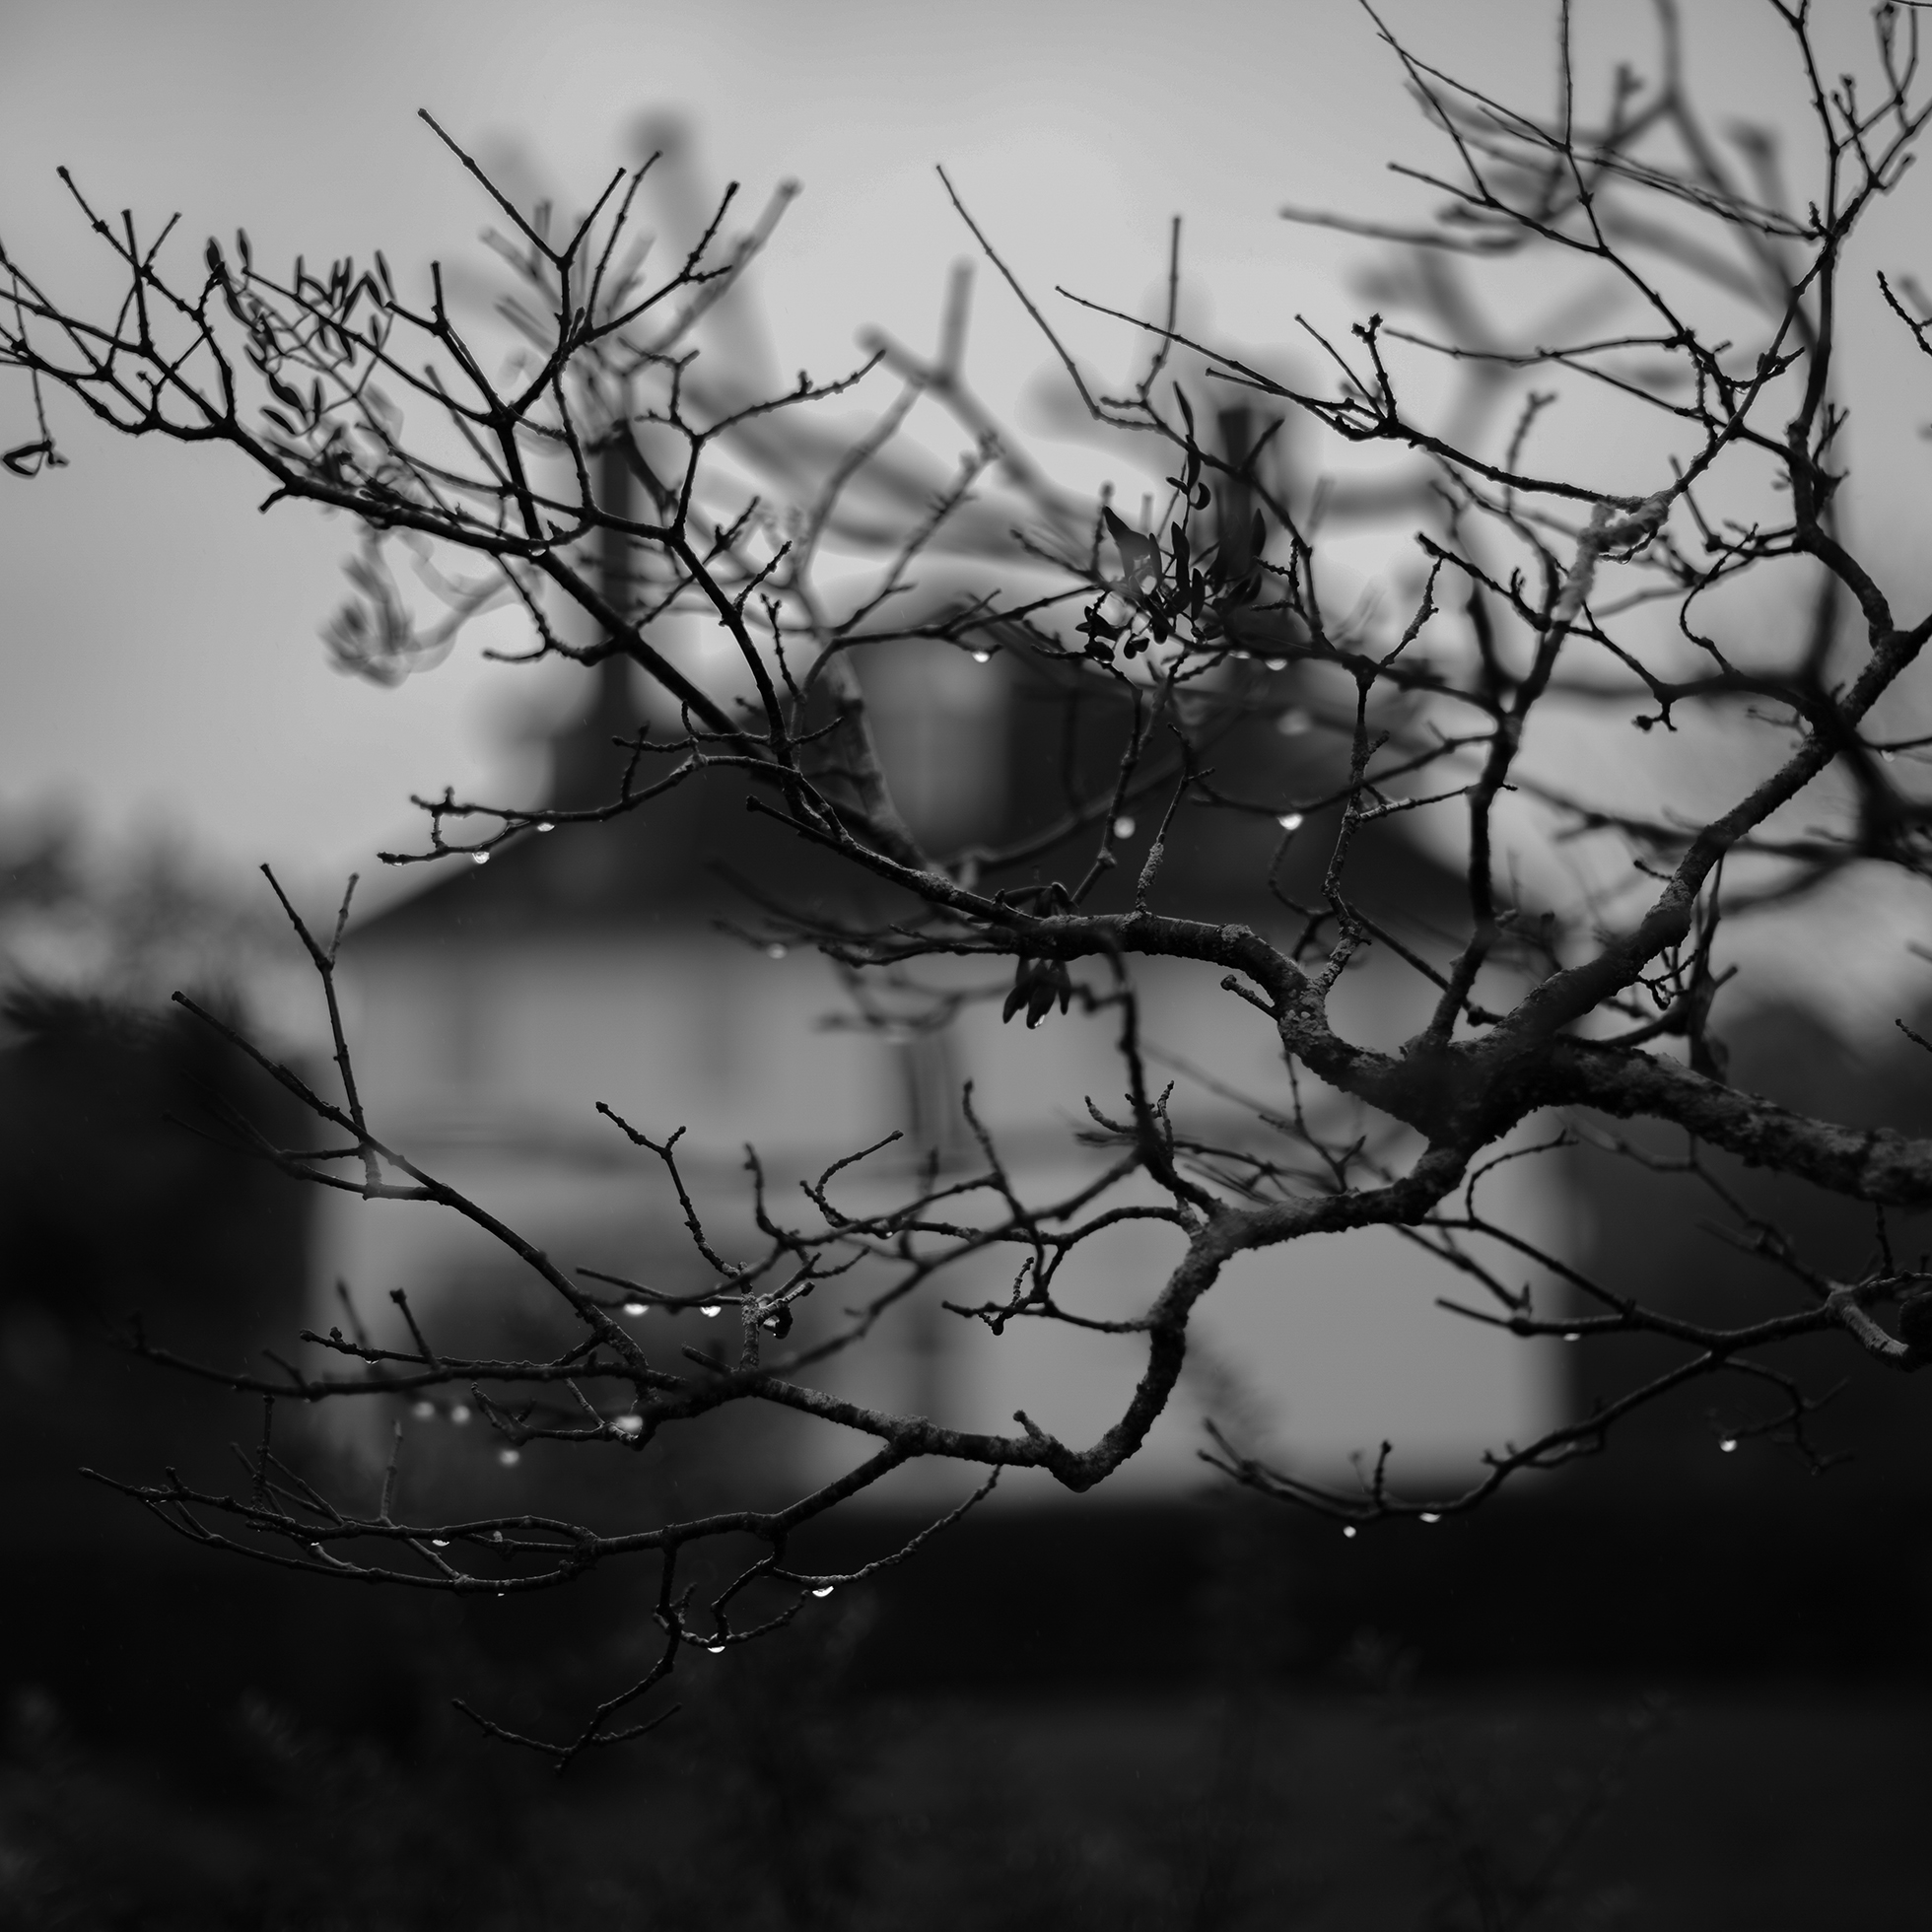 The front of a small two-story house is blurred in the misty background, and coming from the right covering the whole image in the foreground is a thin, leafless tree branch with water droplets on it, and its shadow can be seen in the mist.